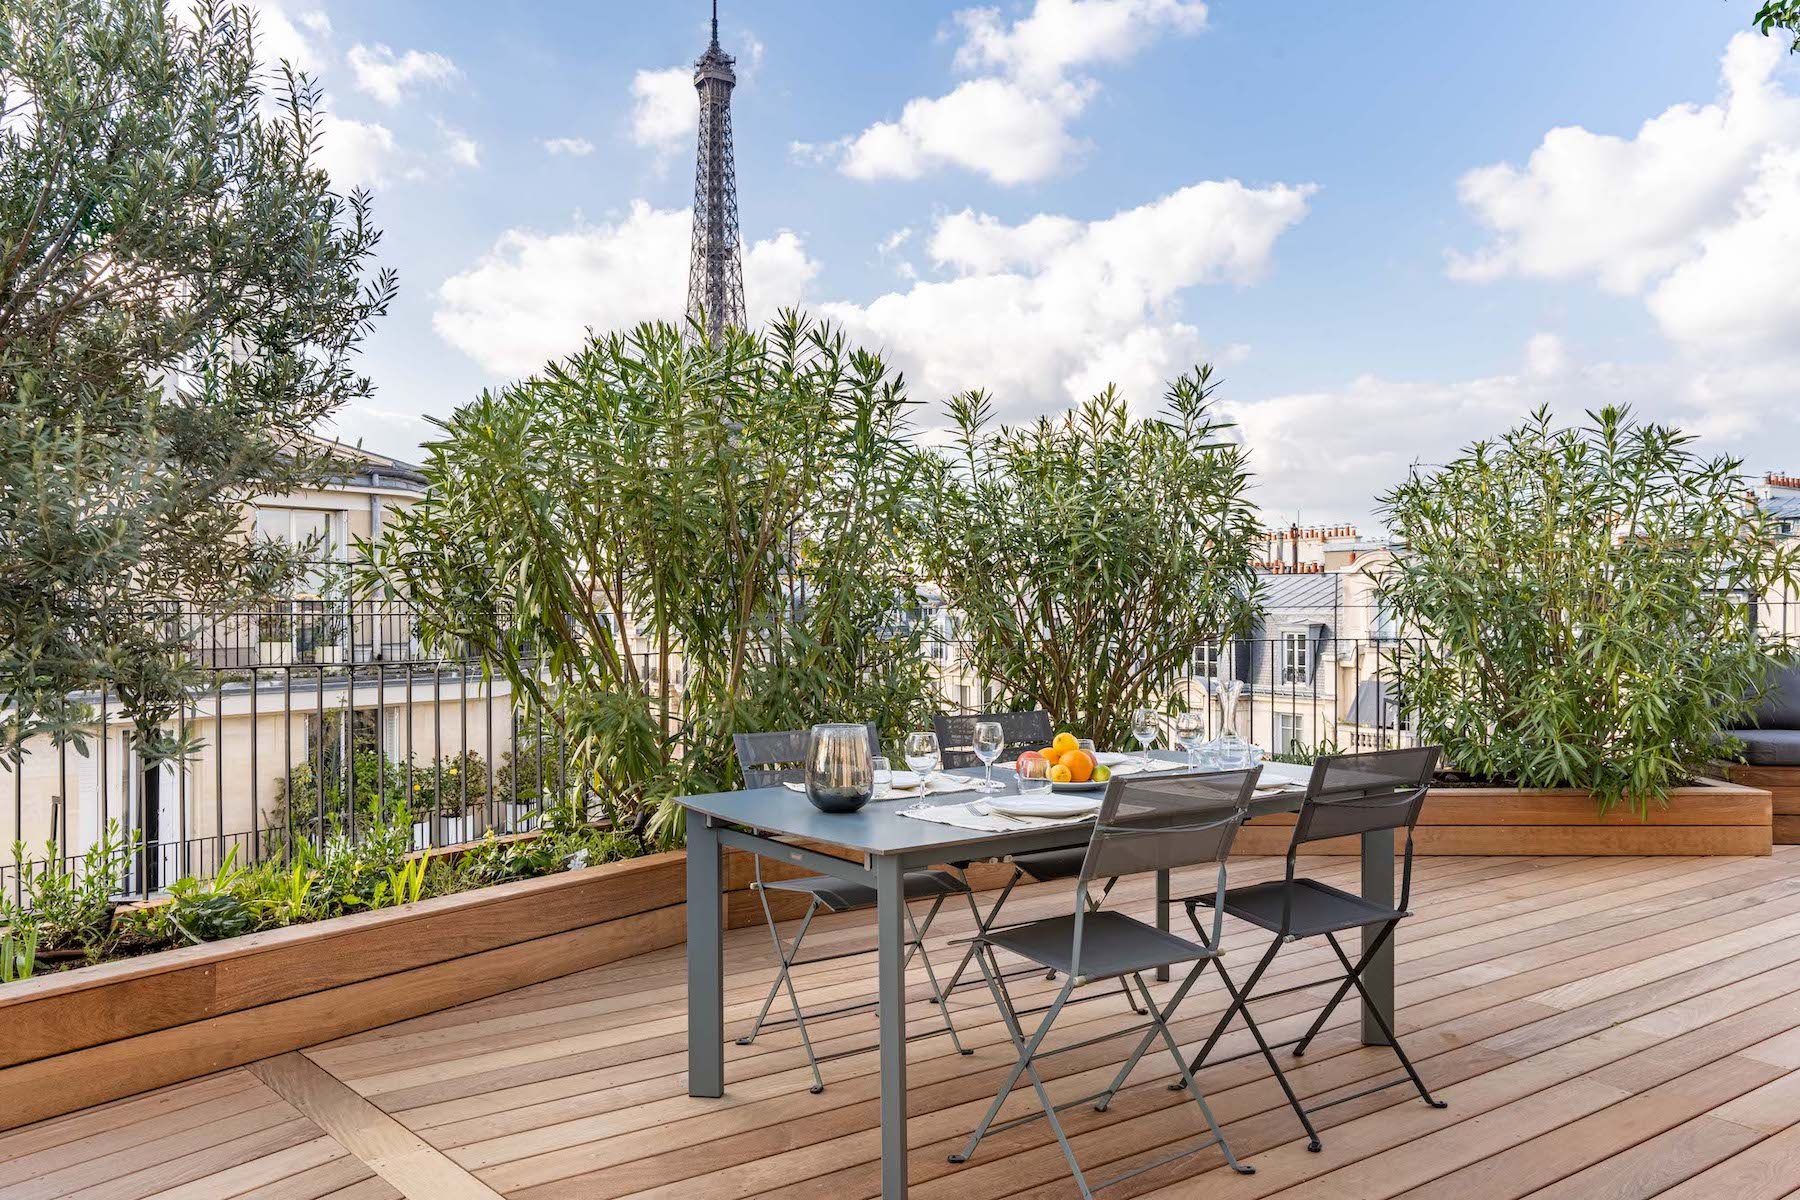 Luxury rooftop apartment with Eiffel Tower view, in the heart of Paris and the 7th arrondissement 